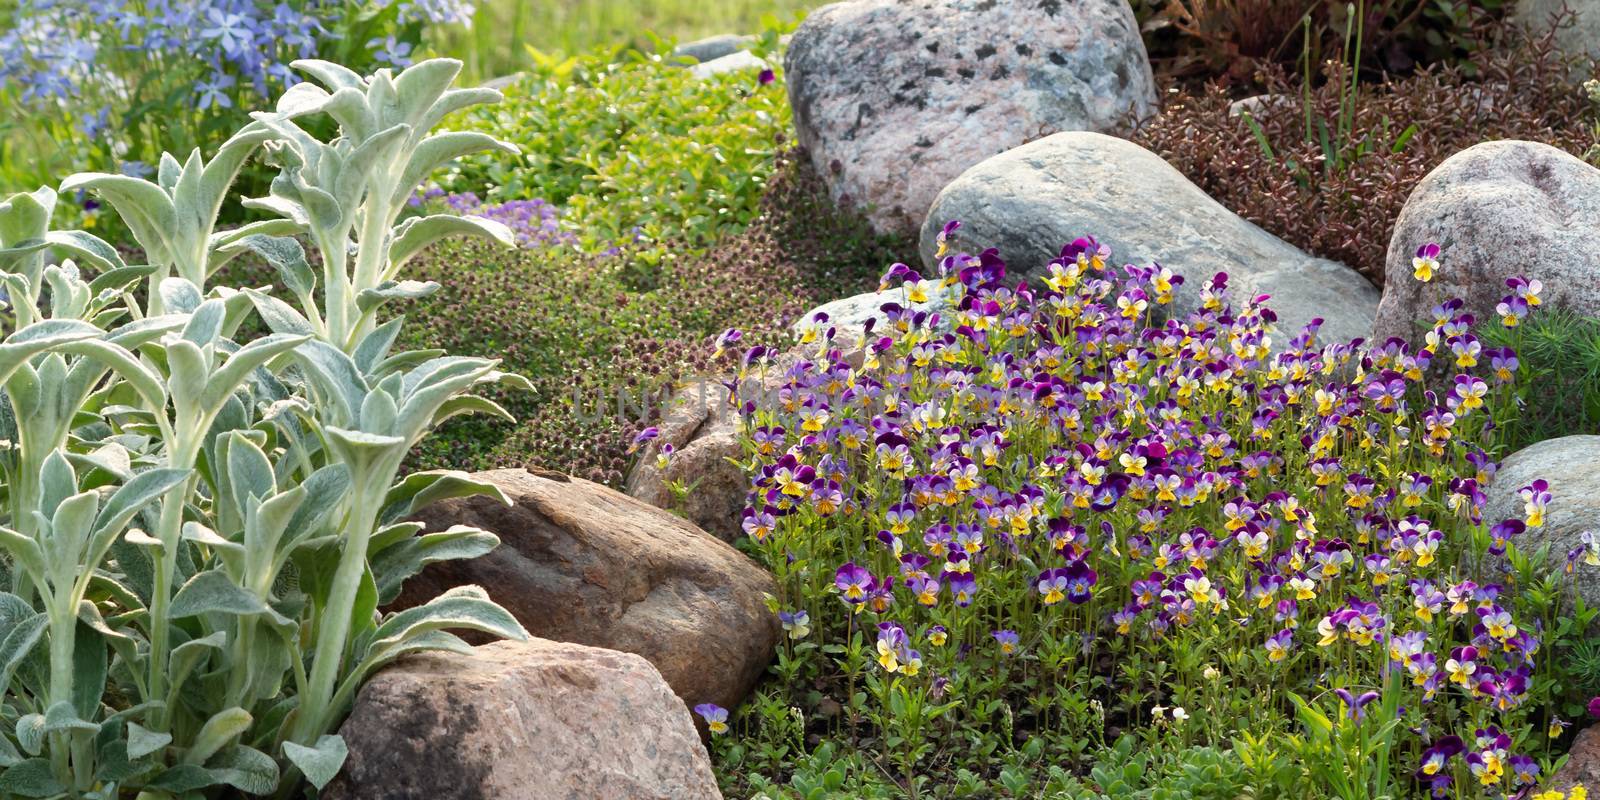 Blooming violets and other flowers in a small rockery in the summer garden.